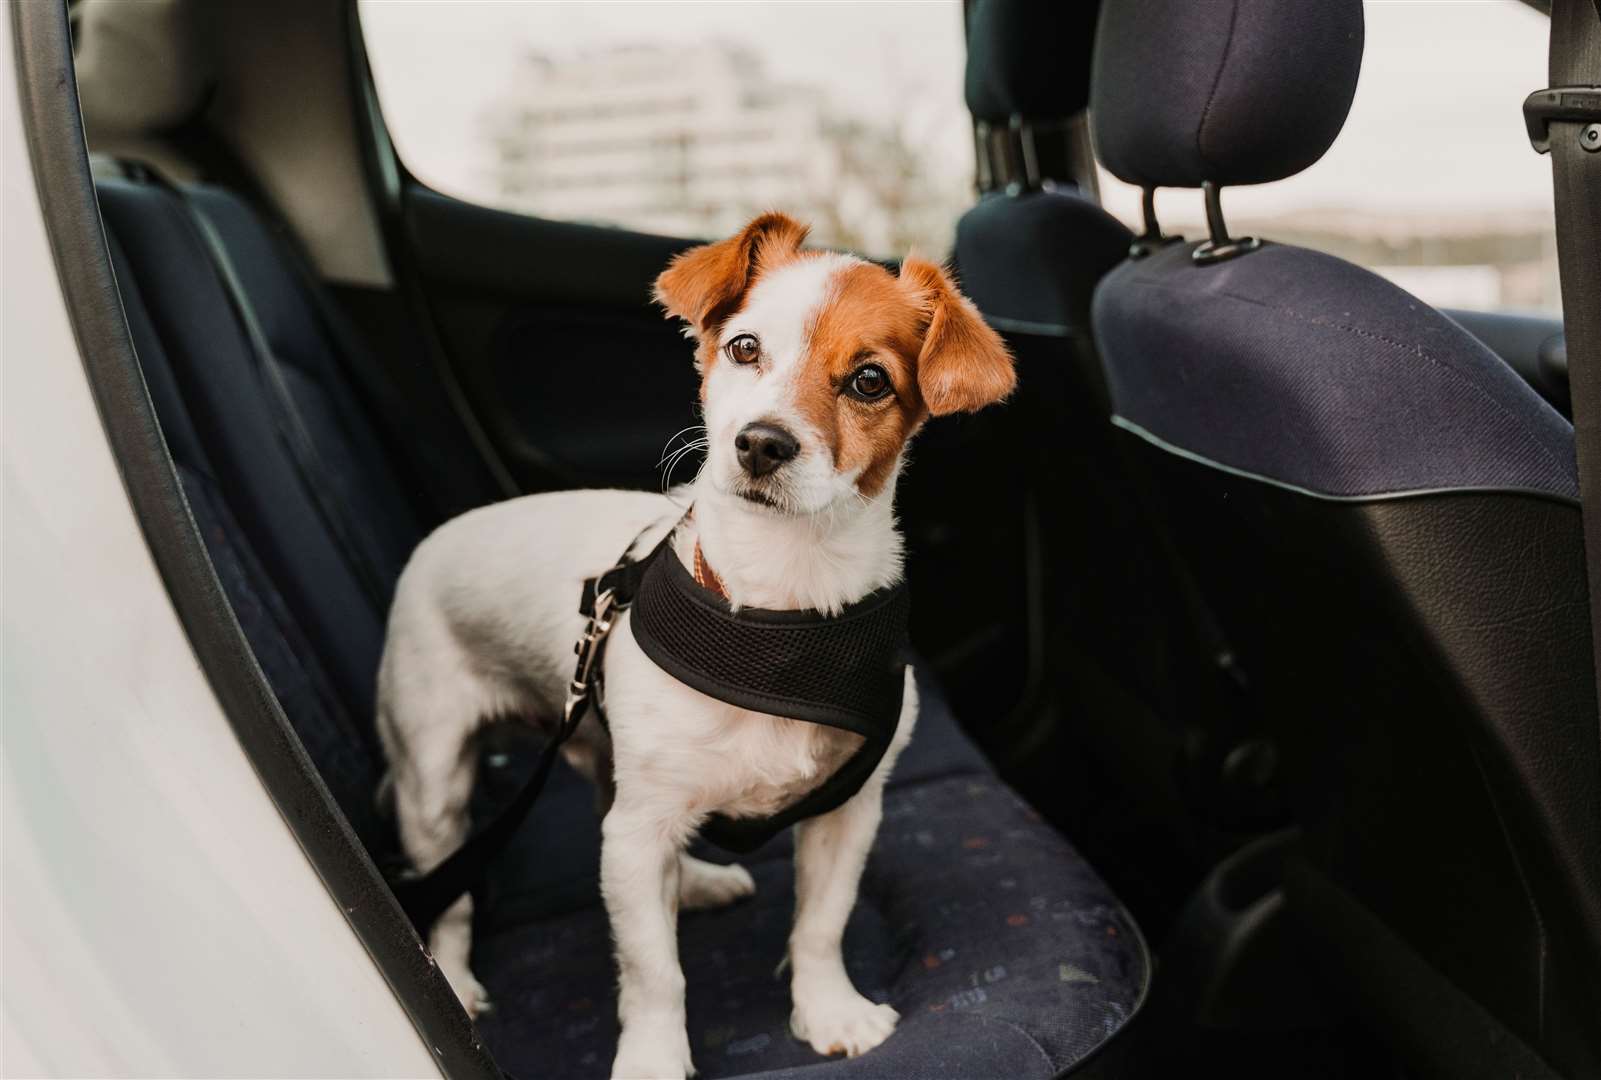 Dogs should not be left in vehicles, caravans or conservatories says the BVA. Image: iStock.